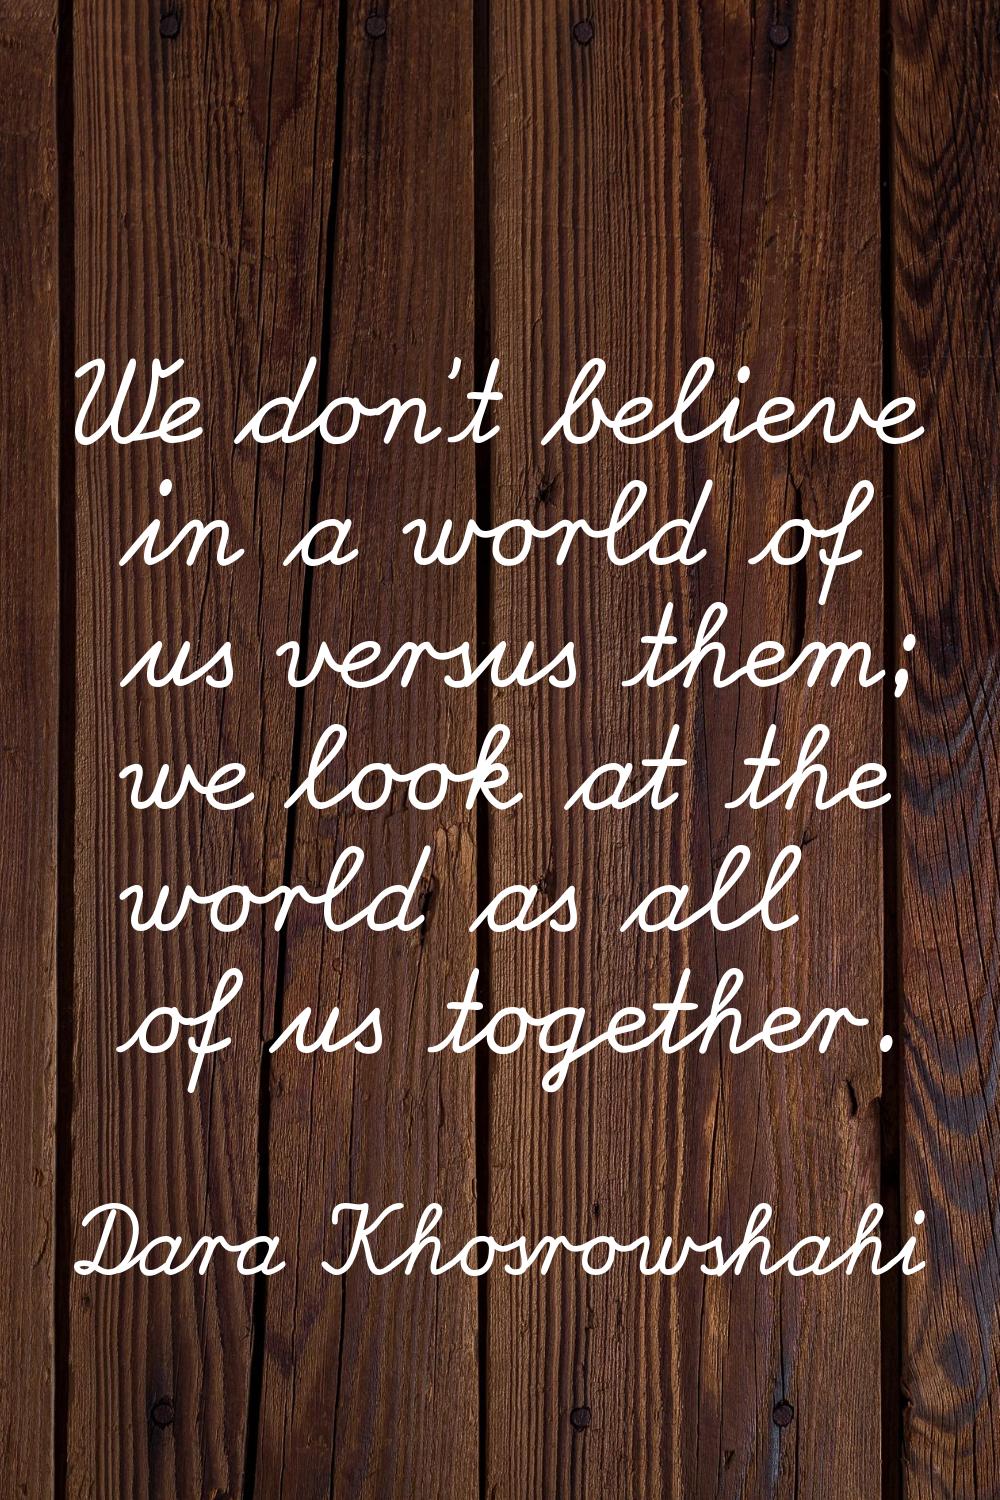 We don't believe in a world of us versus them; we look at the world as all of us together.